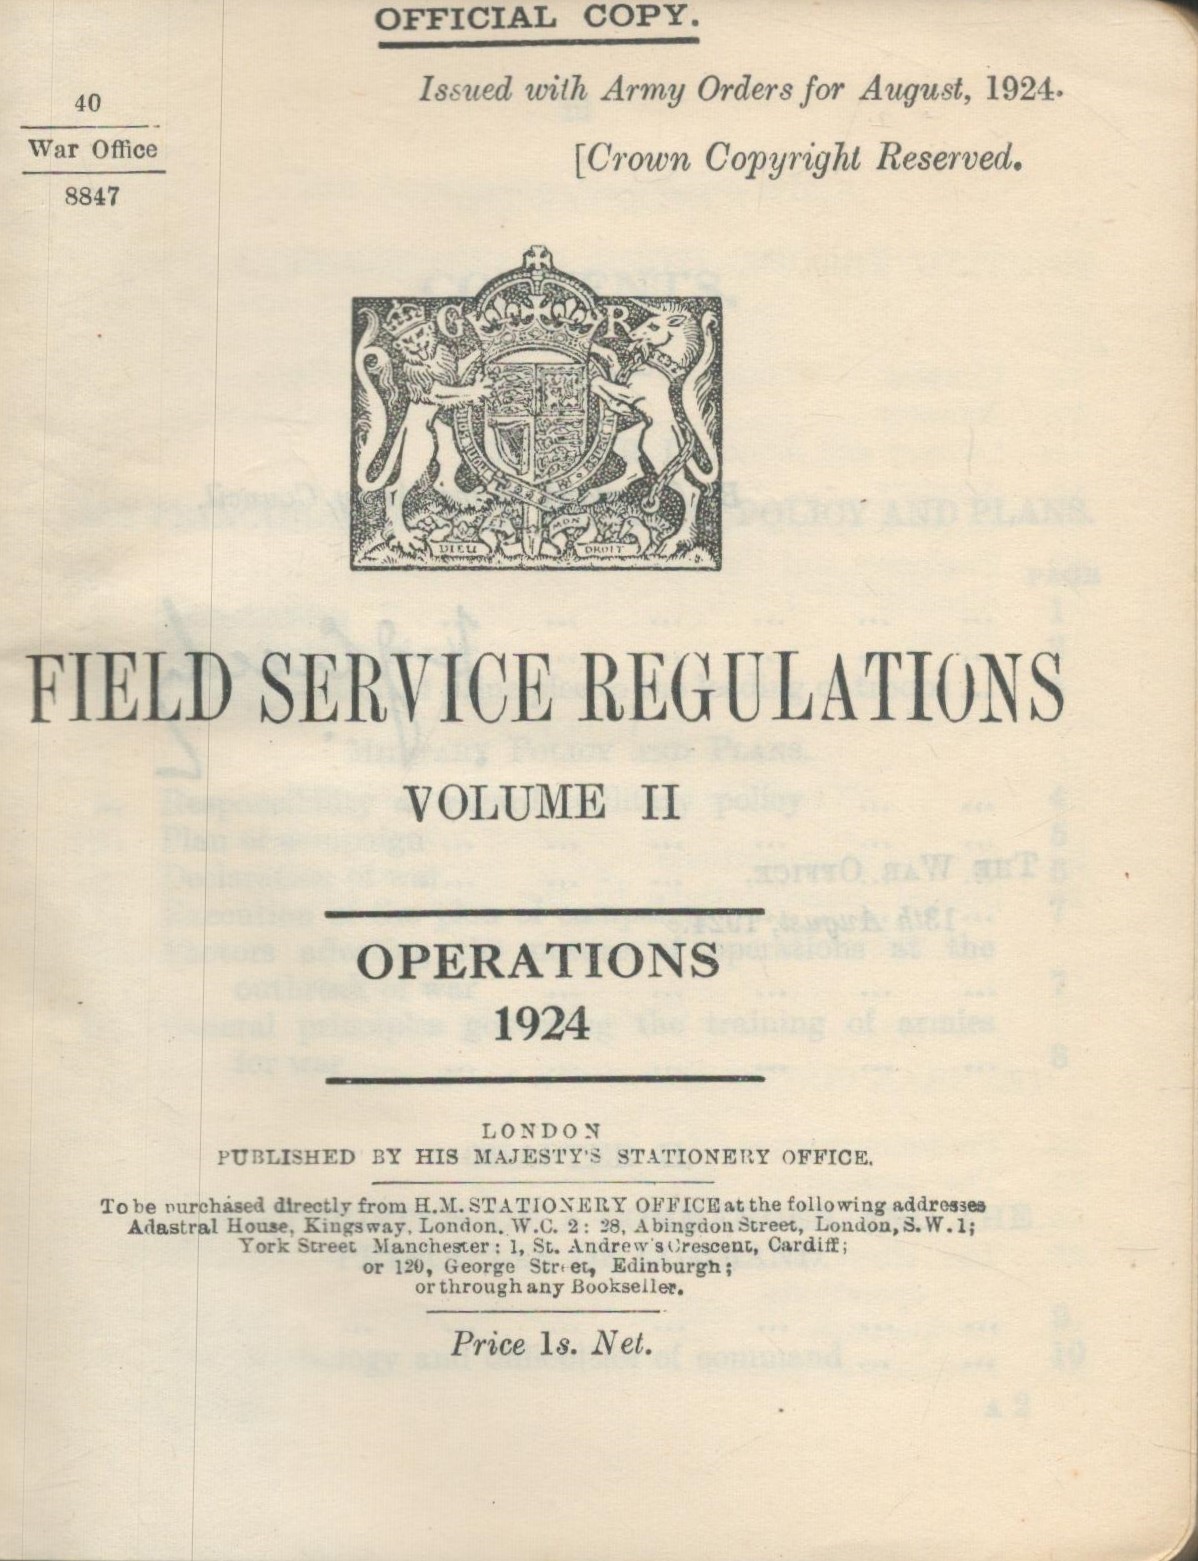 CHG Ross Signed Field Service Regulations Book, Official Copy Volume 2. Good condition Est. - Image 3 of 3